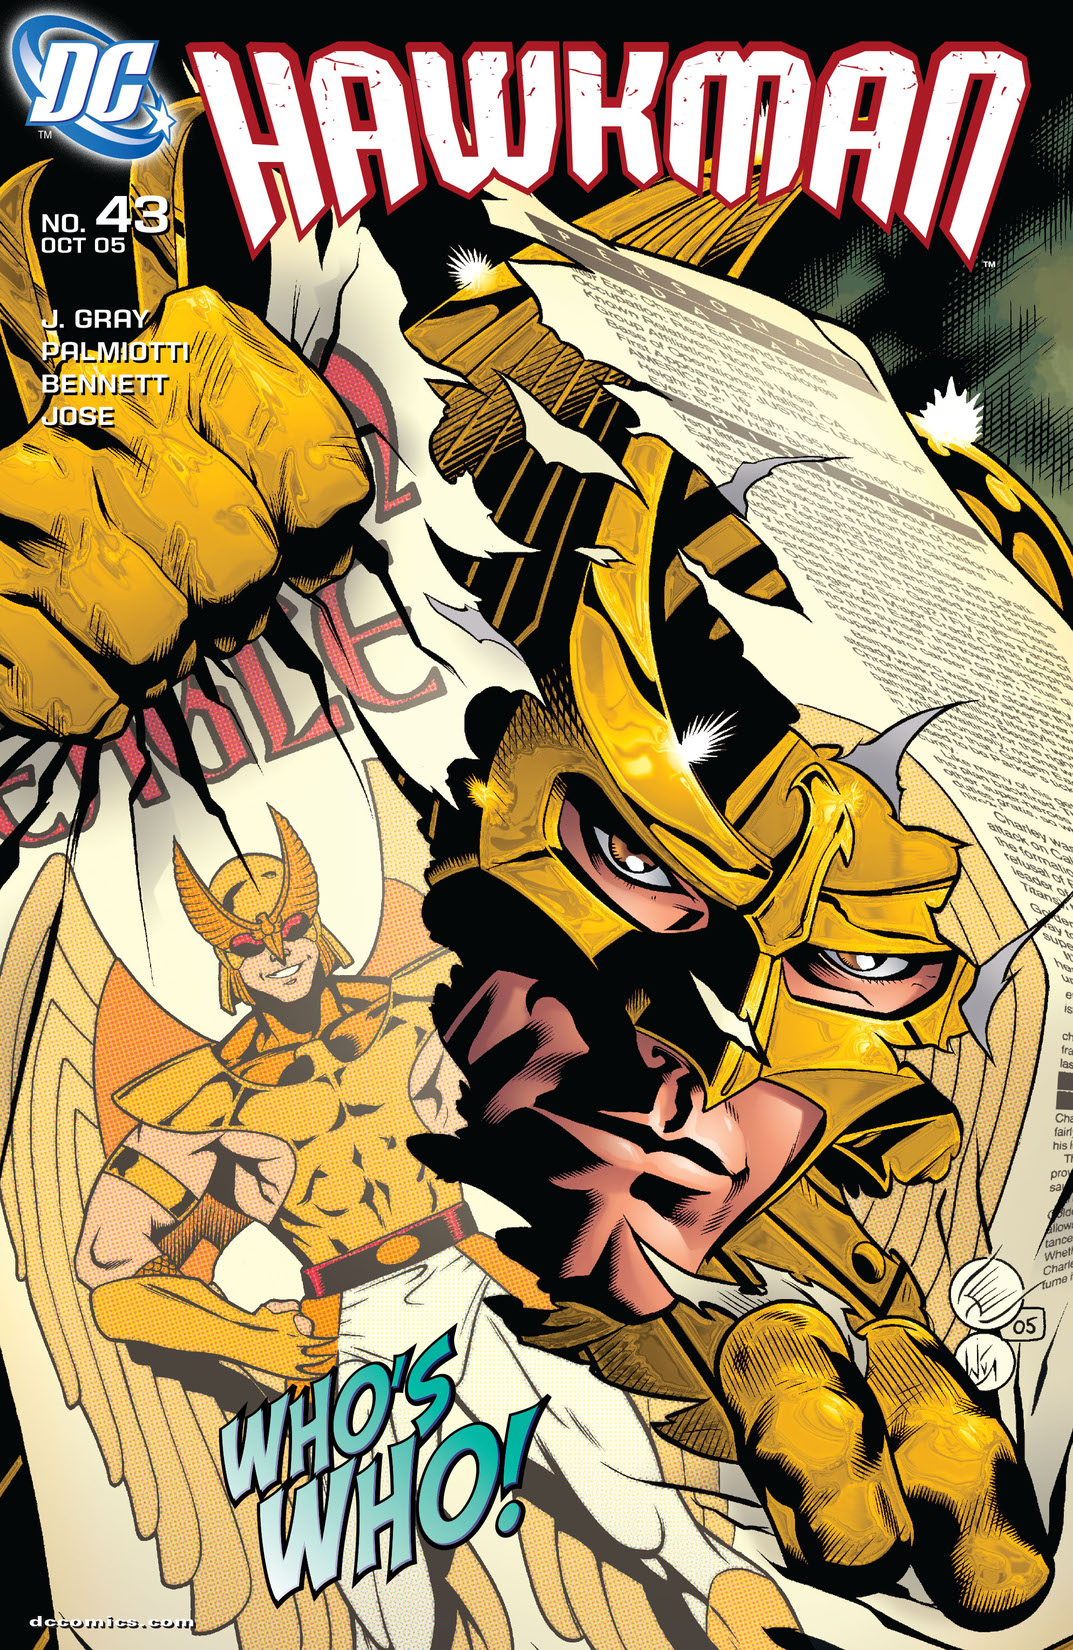 Hawkman (2002-) #43 preview images